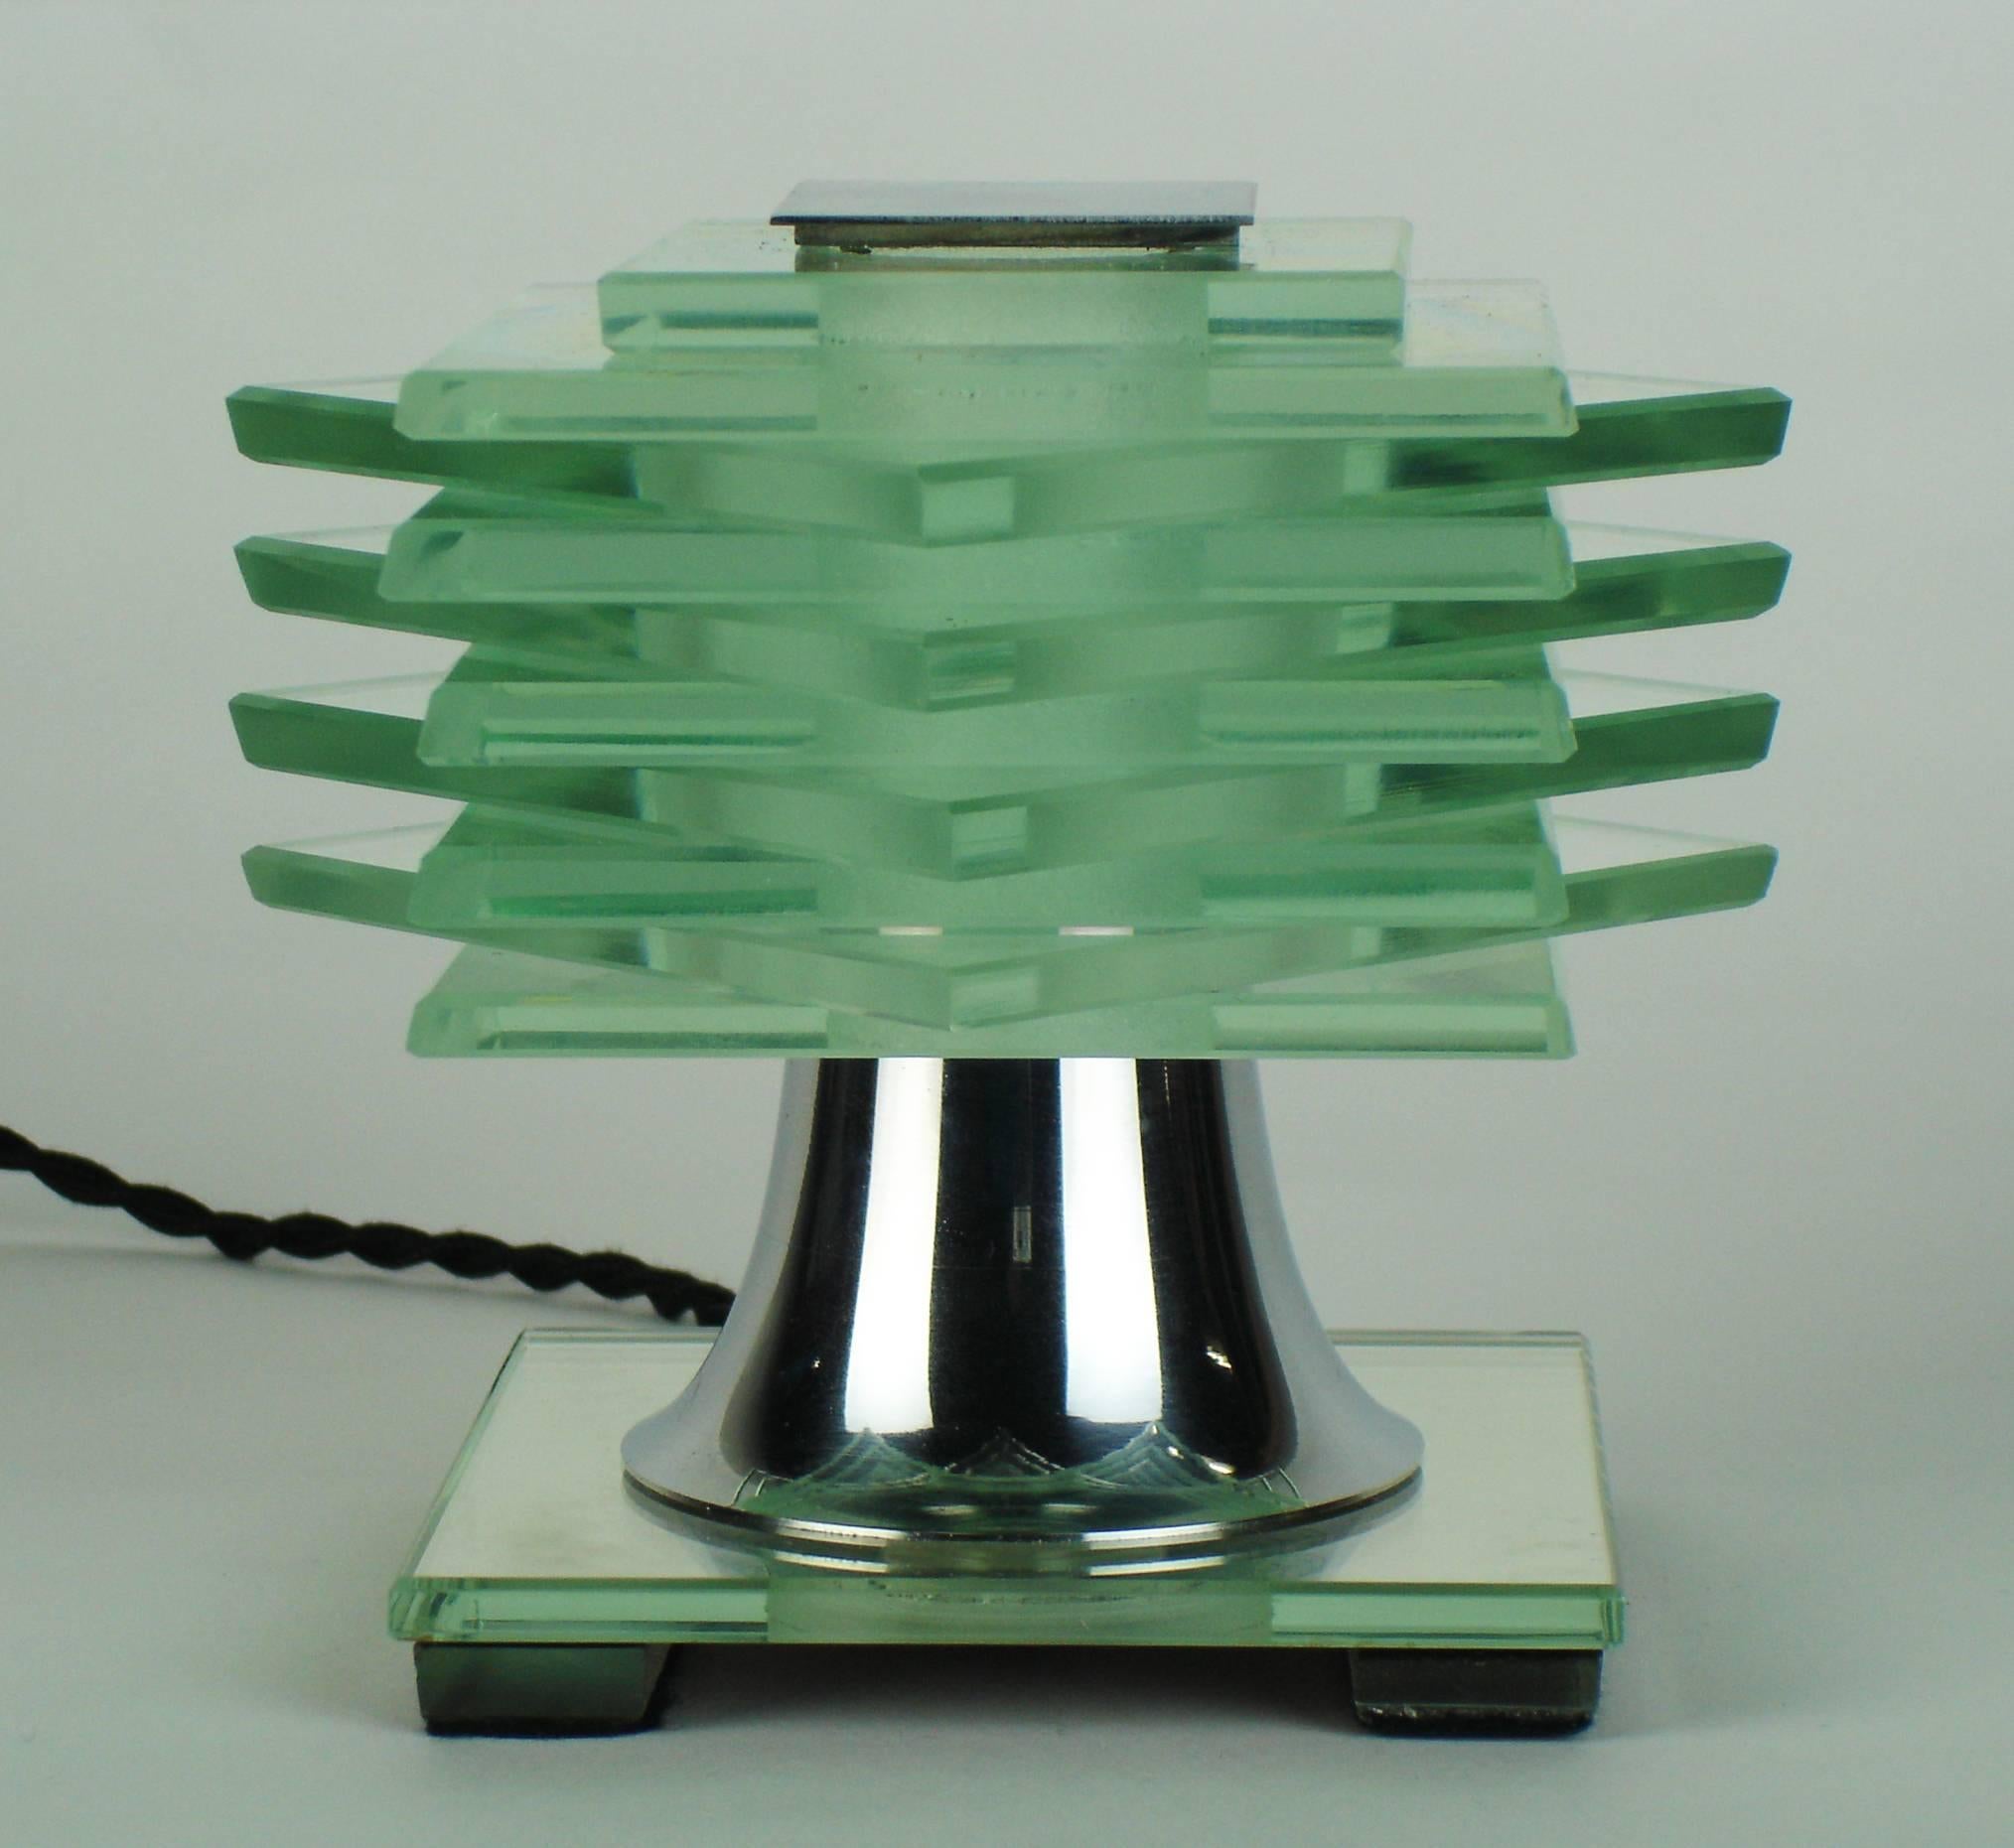 An Art Deco table lamp with ten thin glass plates held between a chromed brass stem and plate, a squared mirror plate support. This lamp is rewired with a small screw socket.